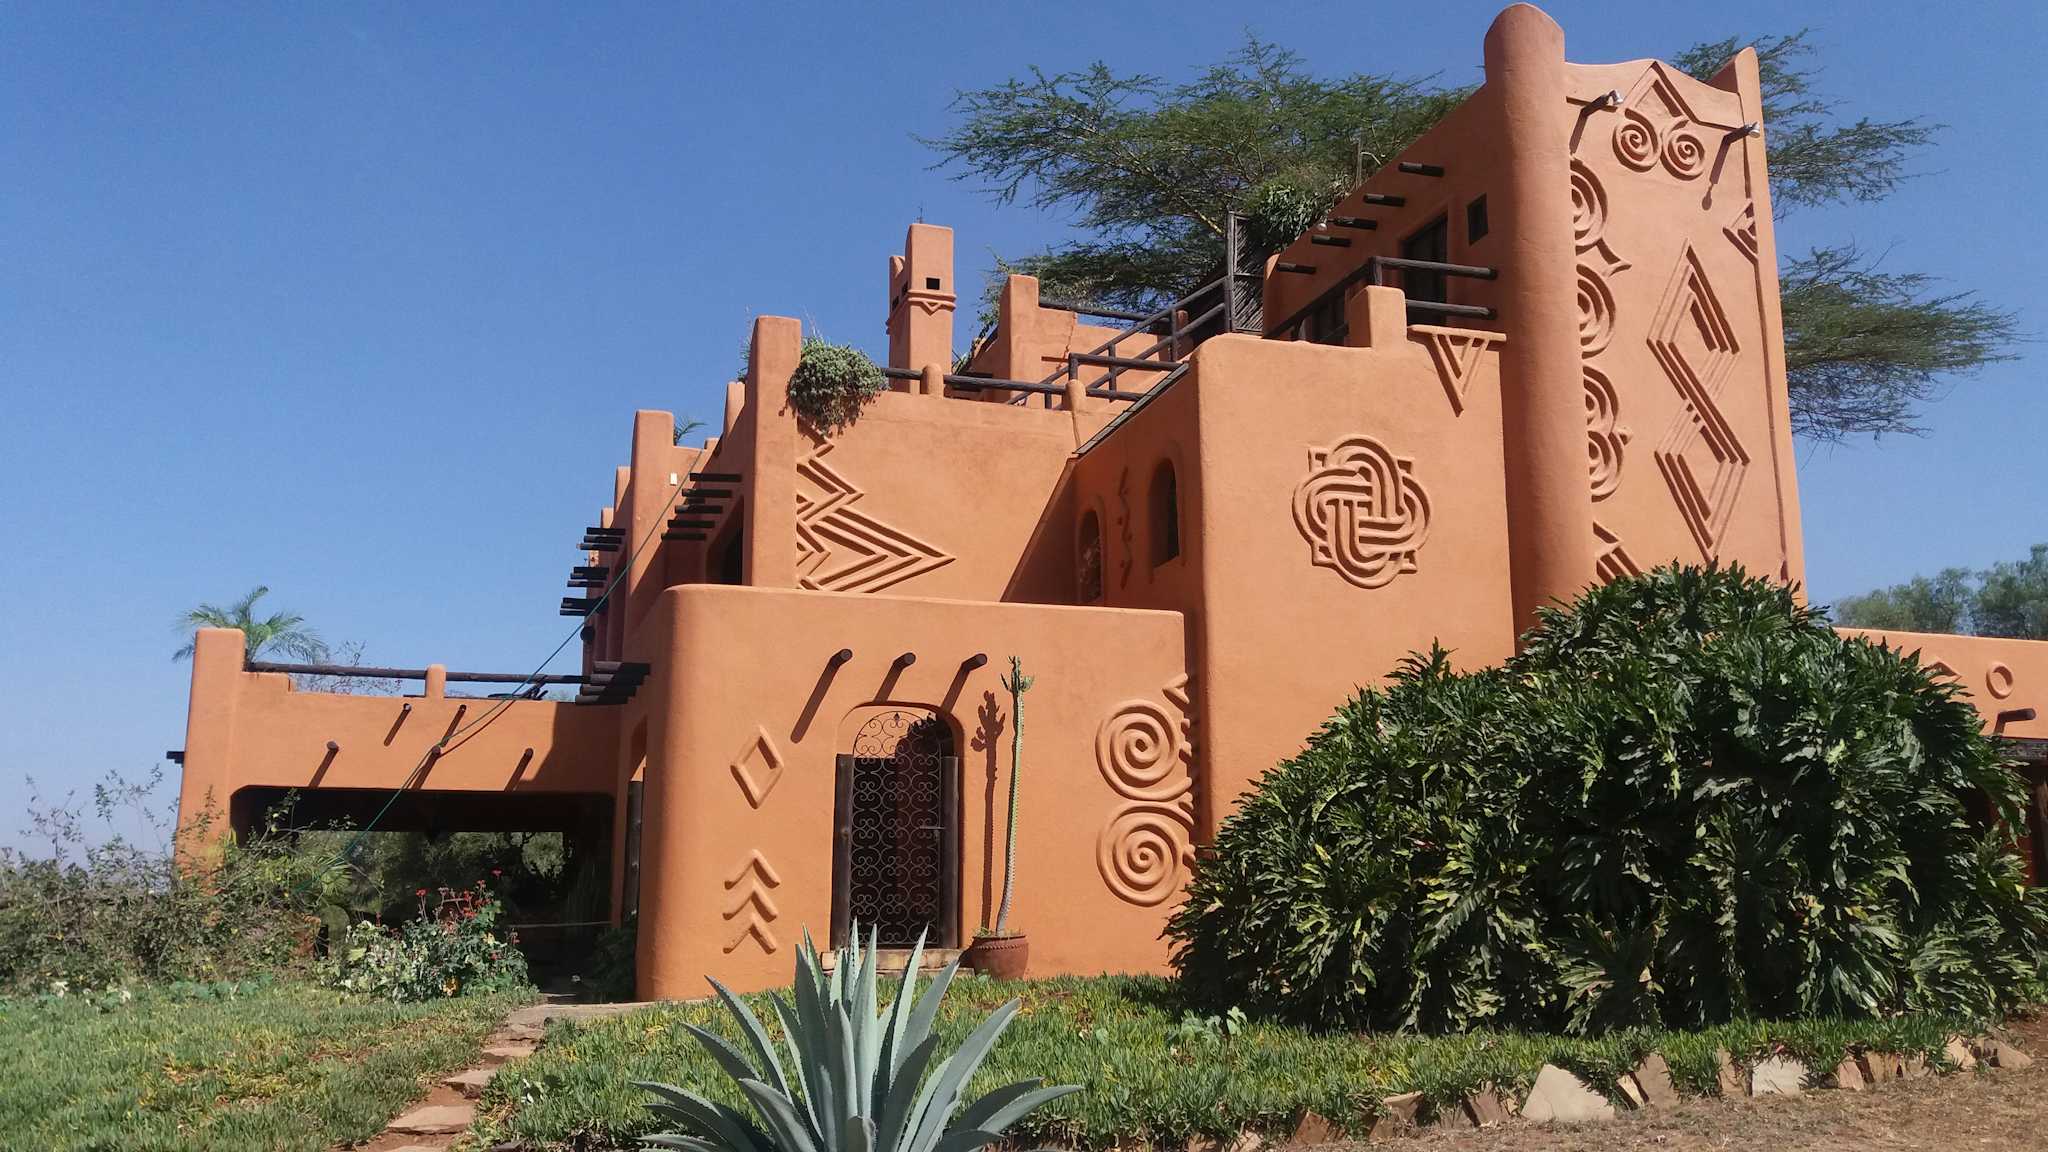 The African Heritage House